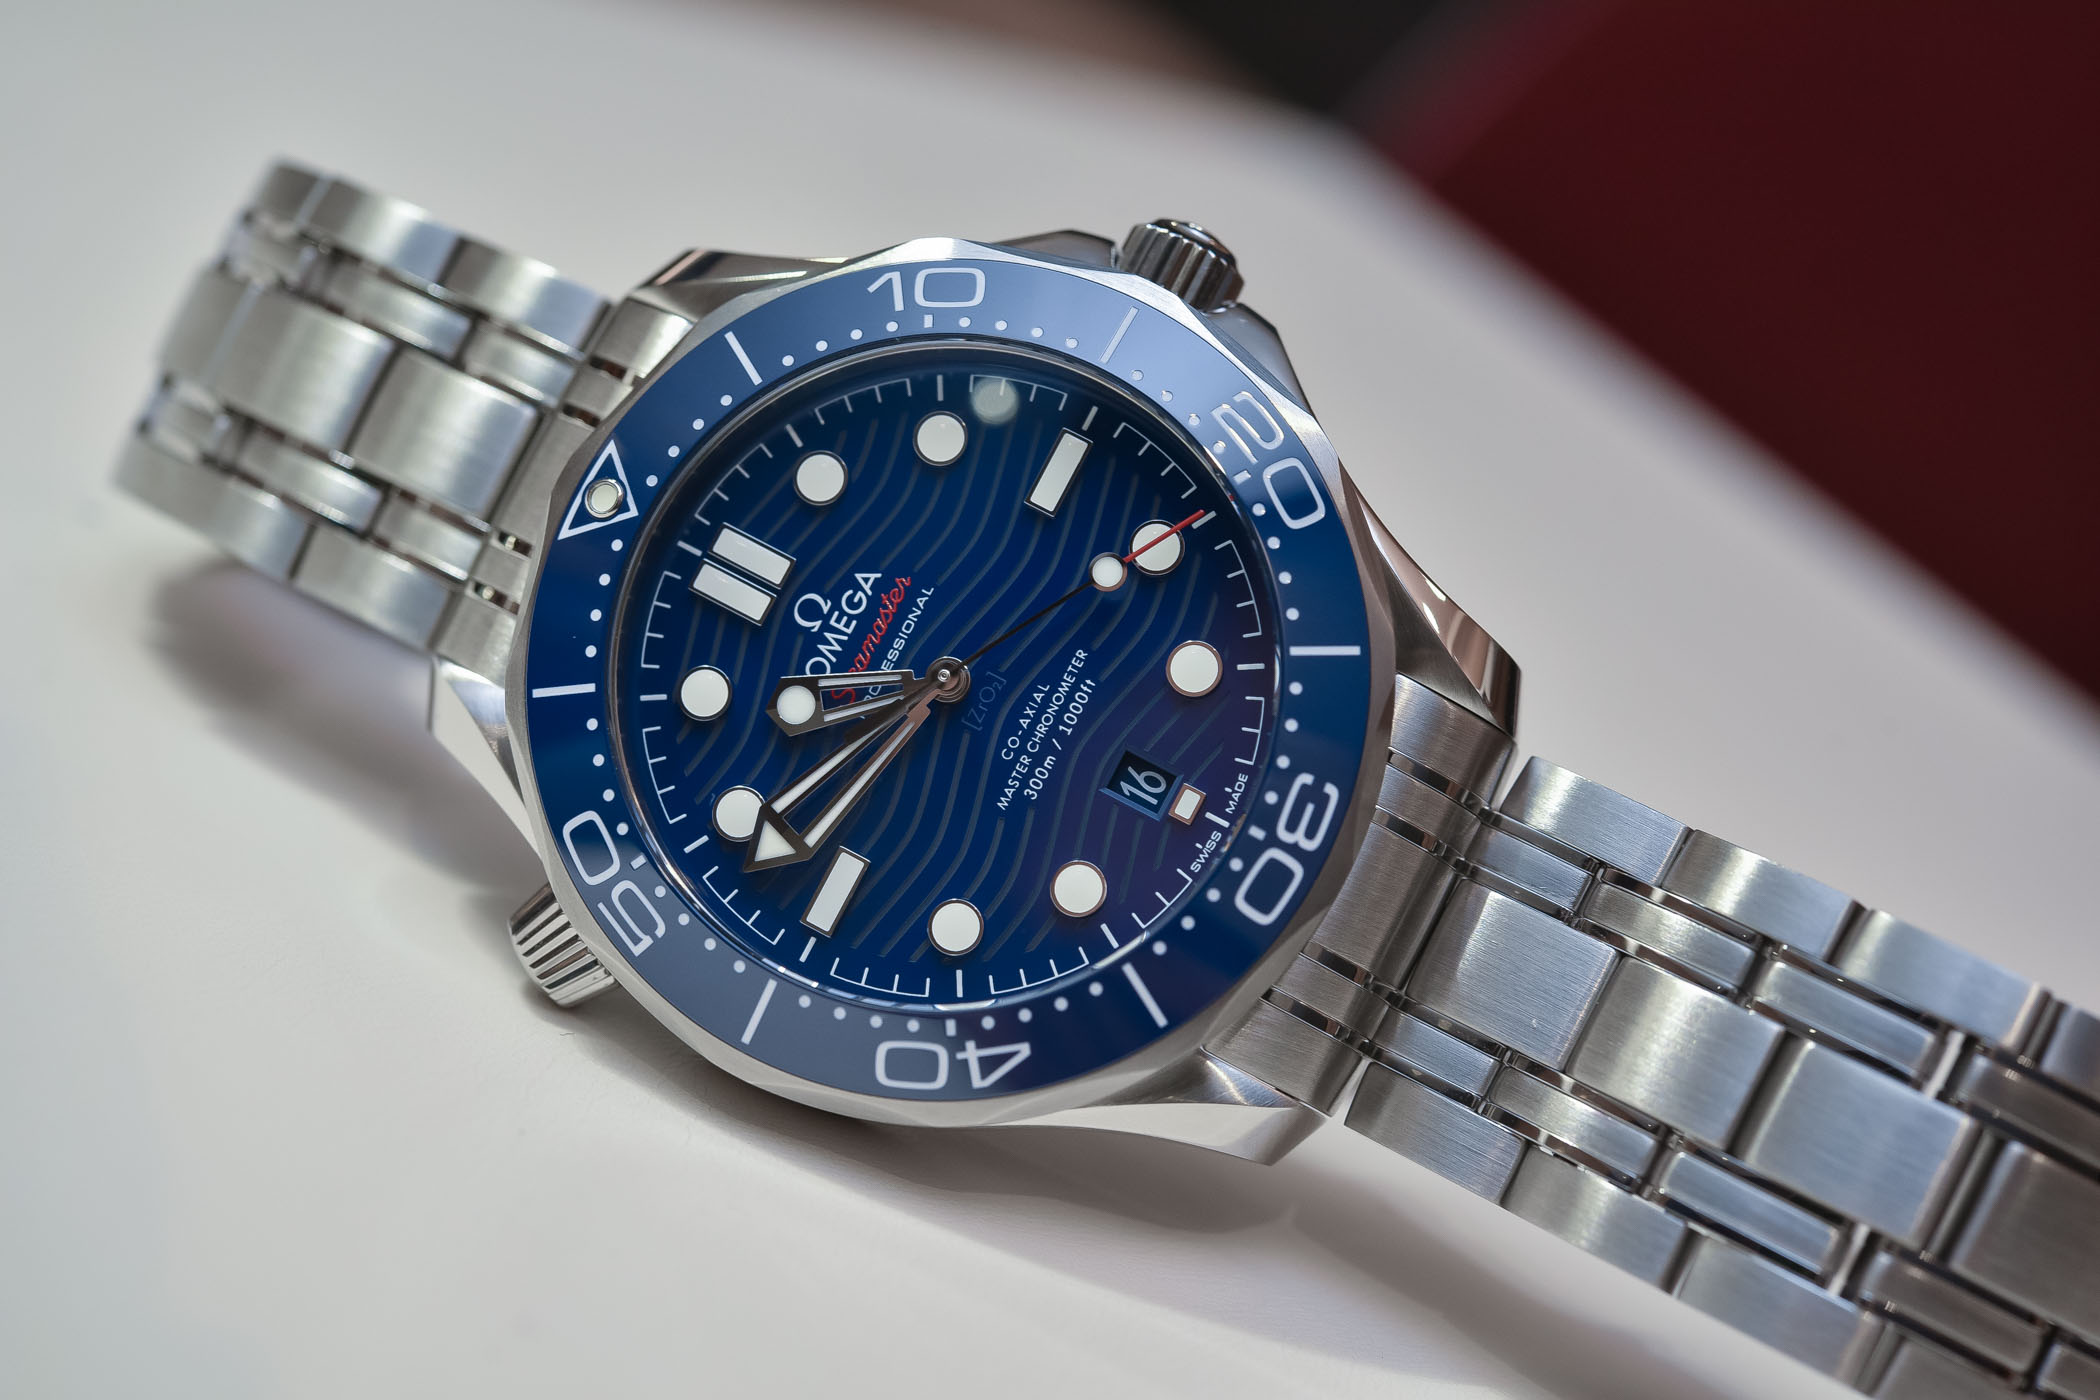 Best Dive Watches Baselworld 2018 - OMEGA SEAMASTER DIVER 300M